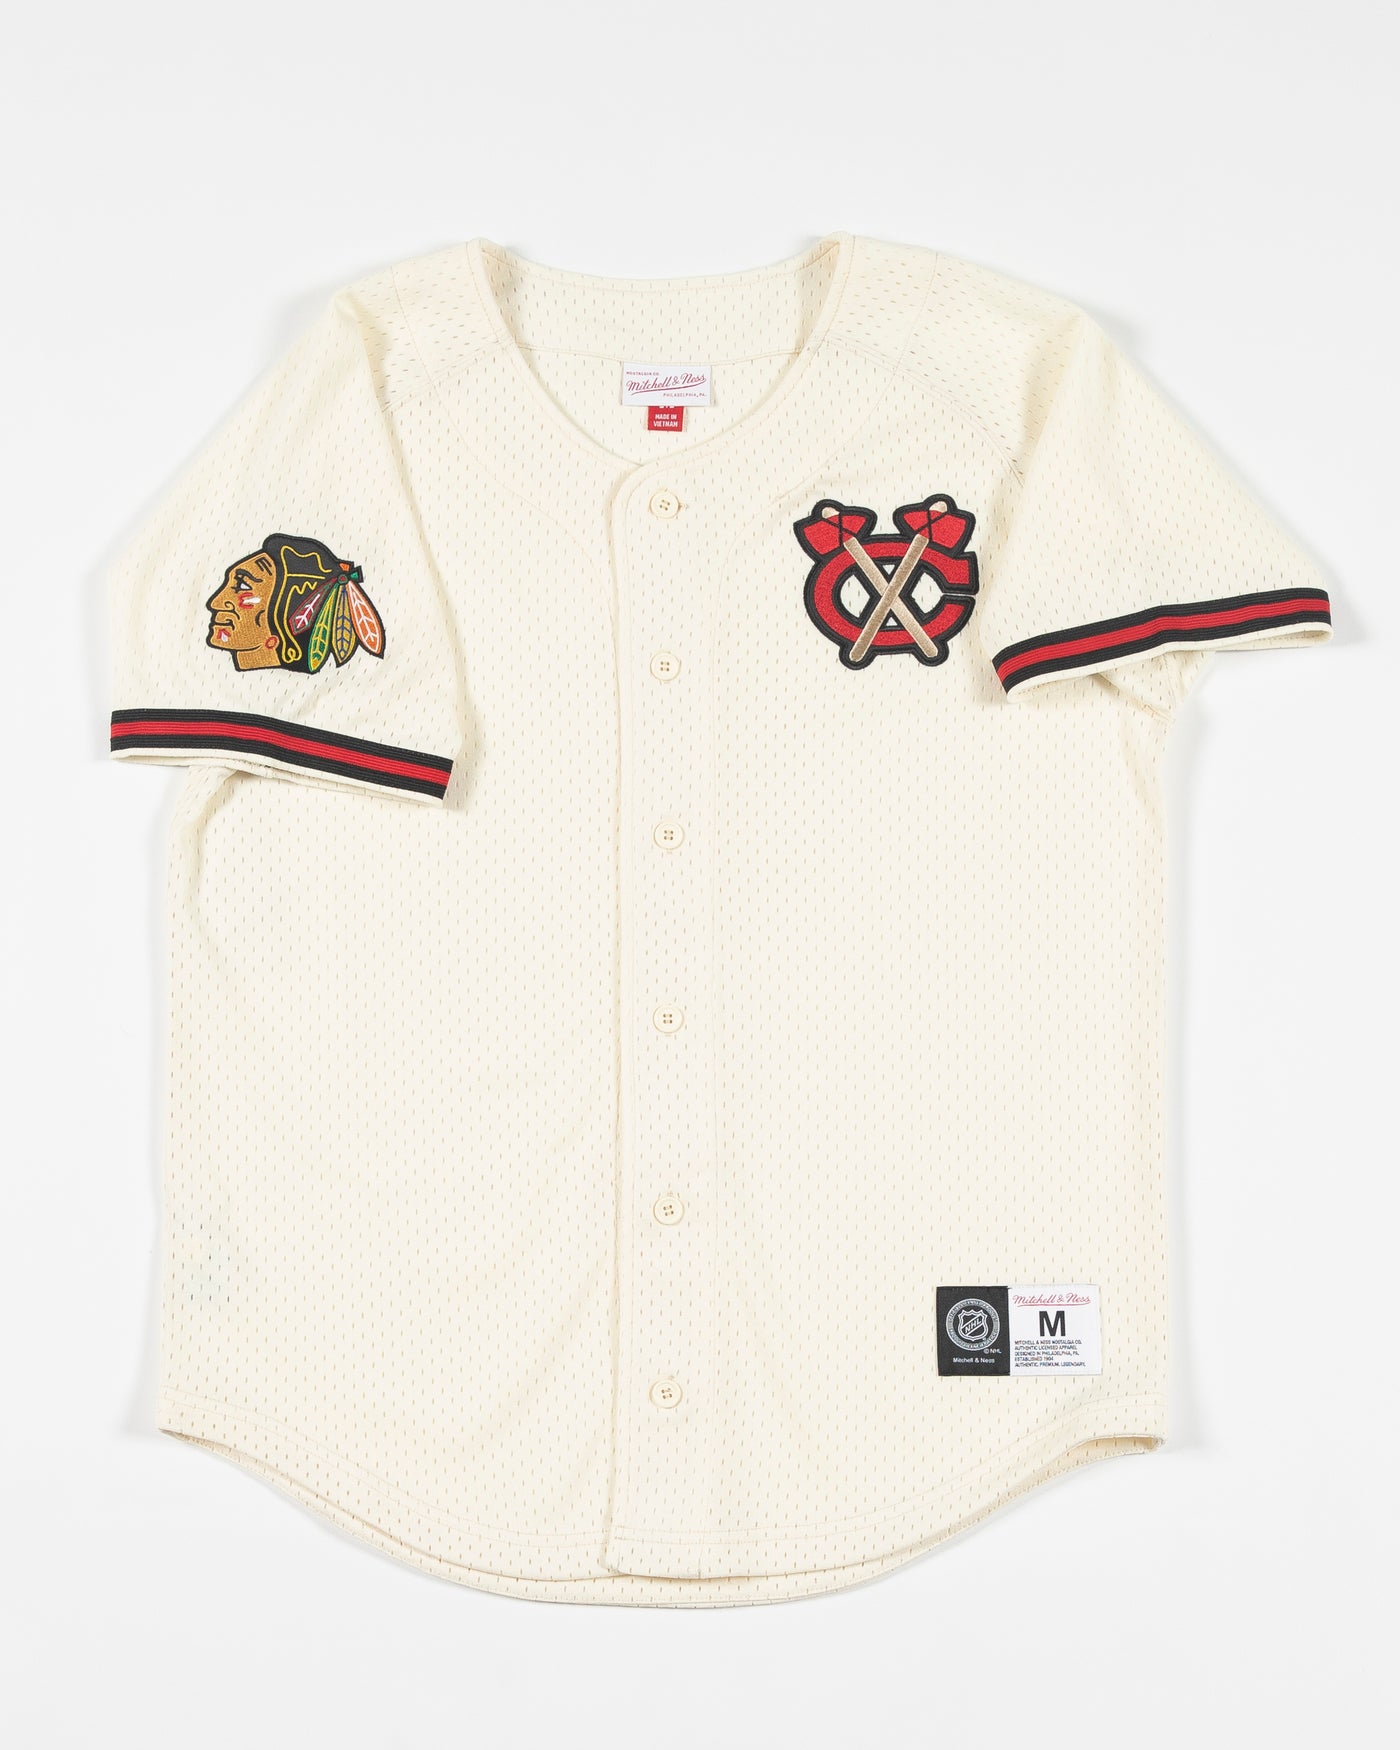 oatmeal Mitchell & Ness baseball inspired jersey with Chicago Blackhawks secondary logo on left chest and primary logo on right shoulder - front lay flat